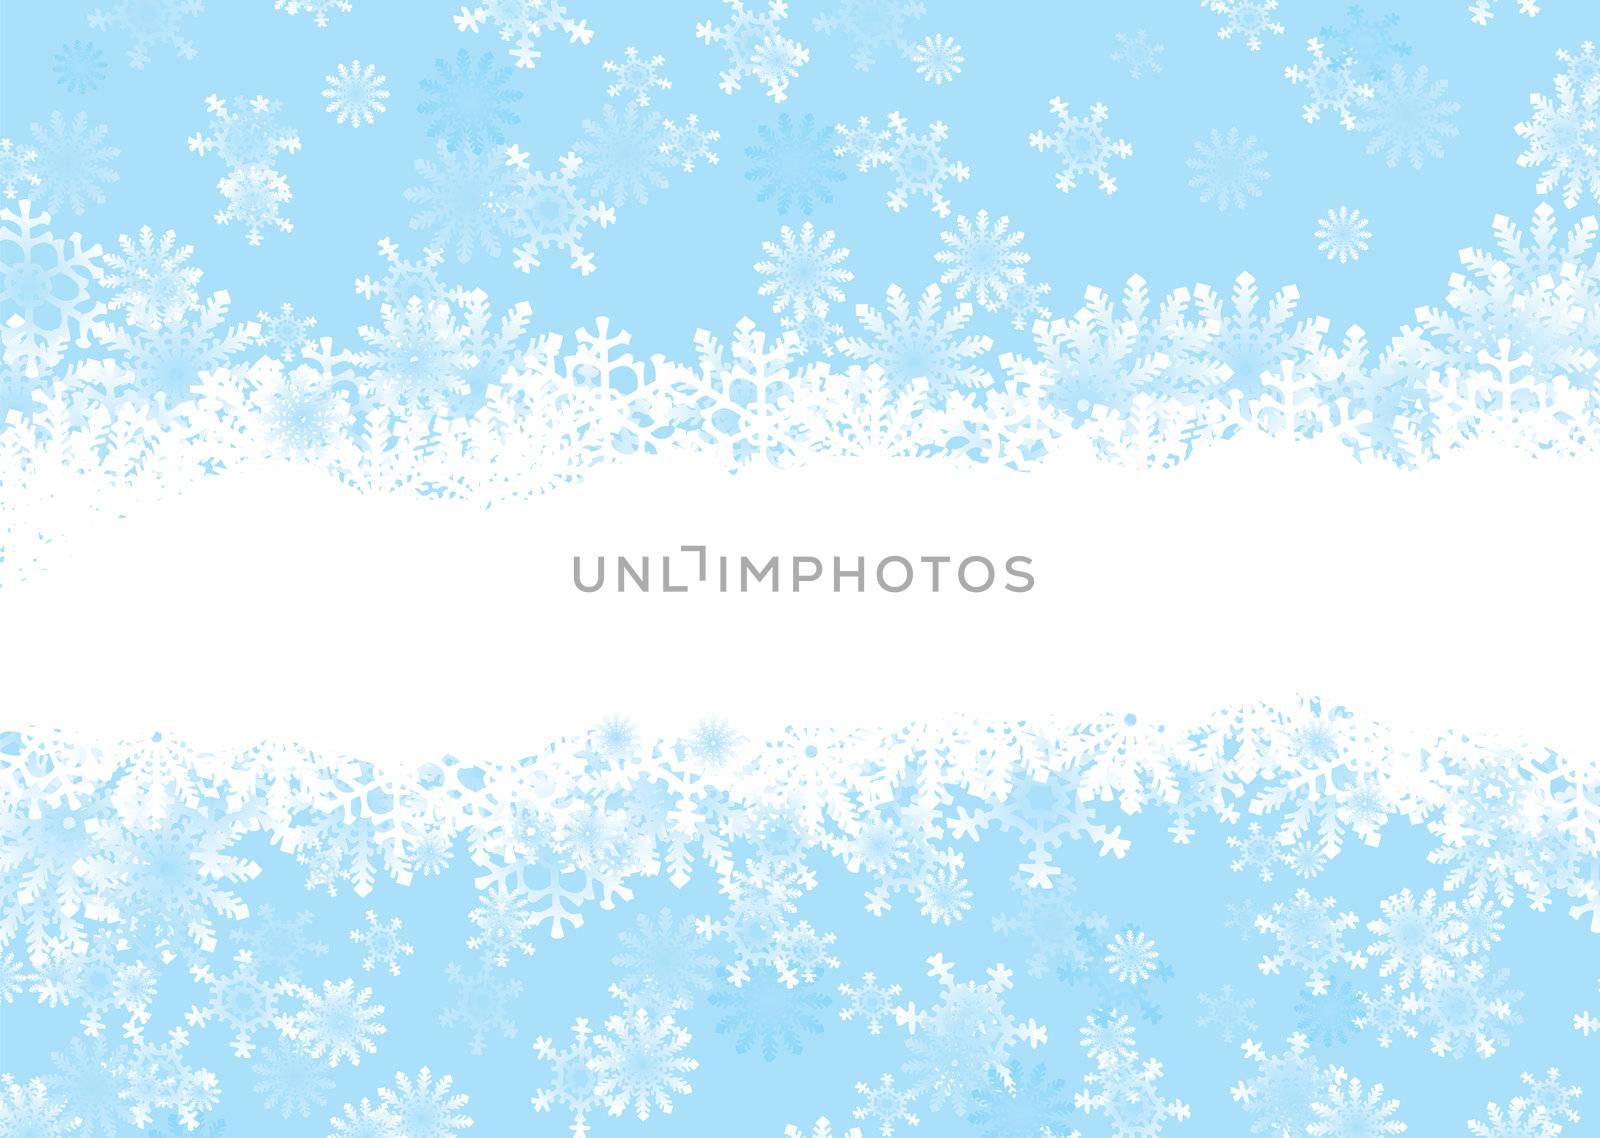 Snowflake christmas background with white snow flake banner